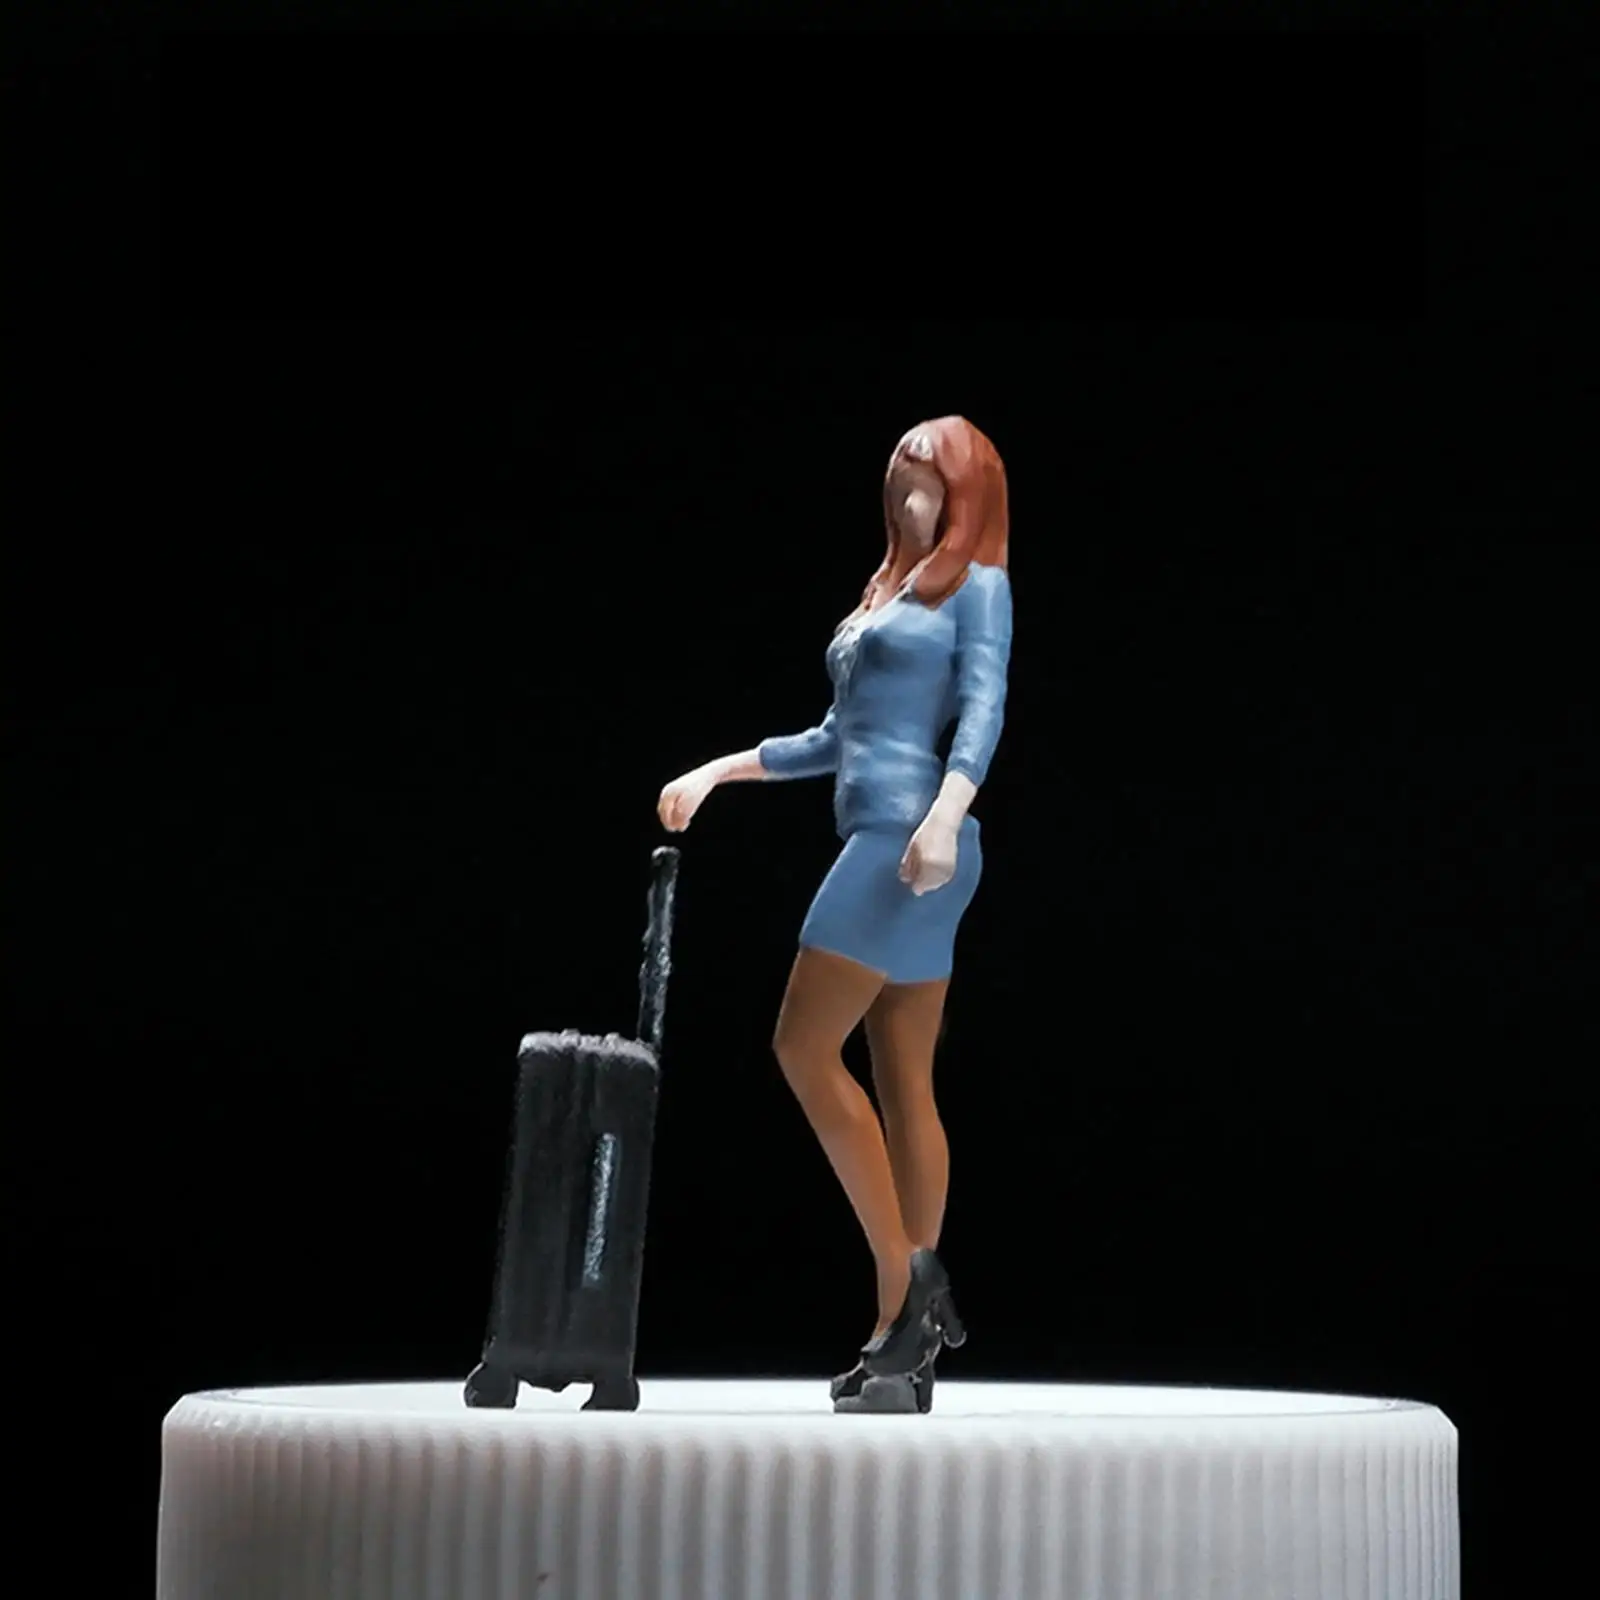 1/64 flying Attendant Model Girl People Figurine Painted Figures for Train Station Layout